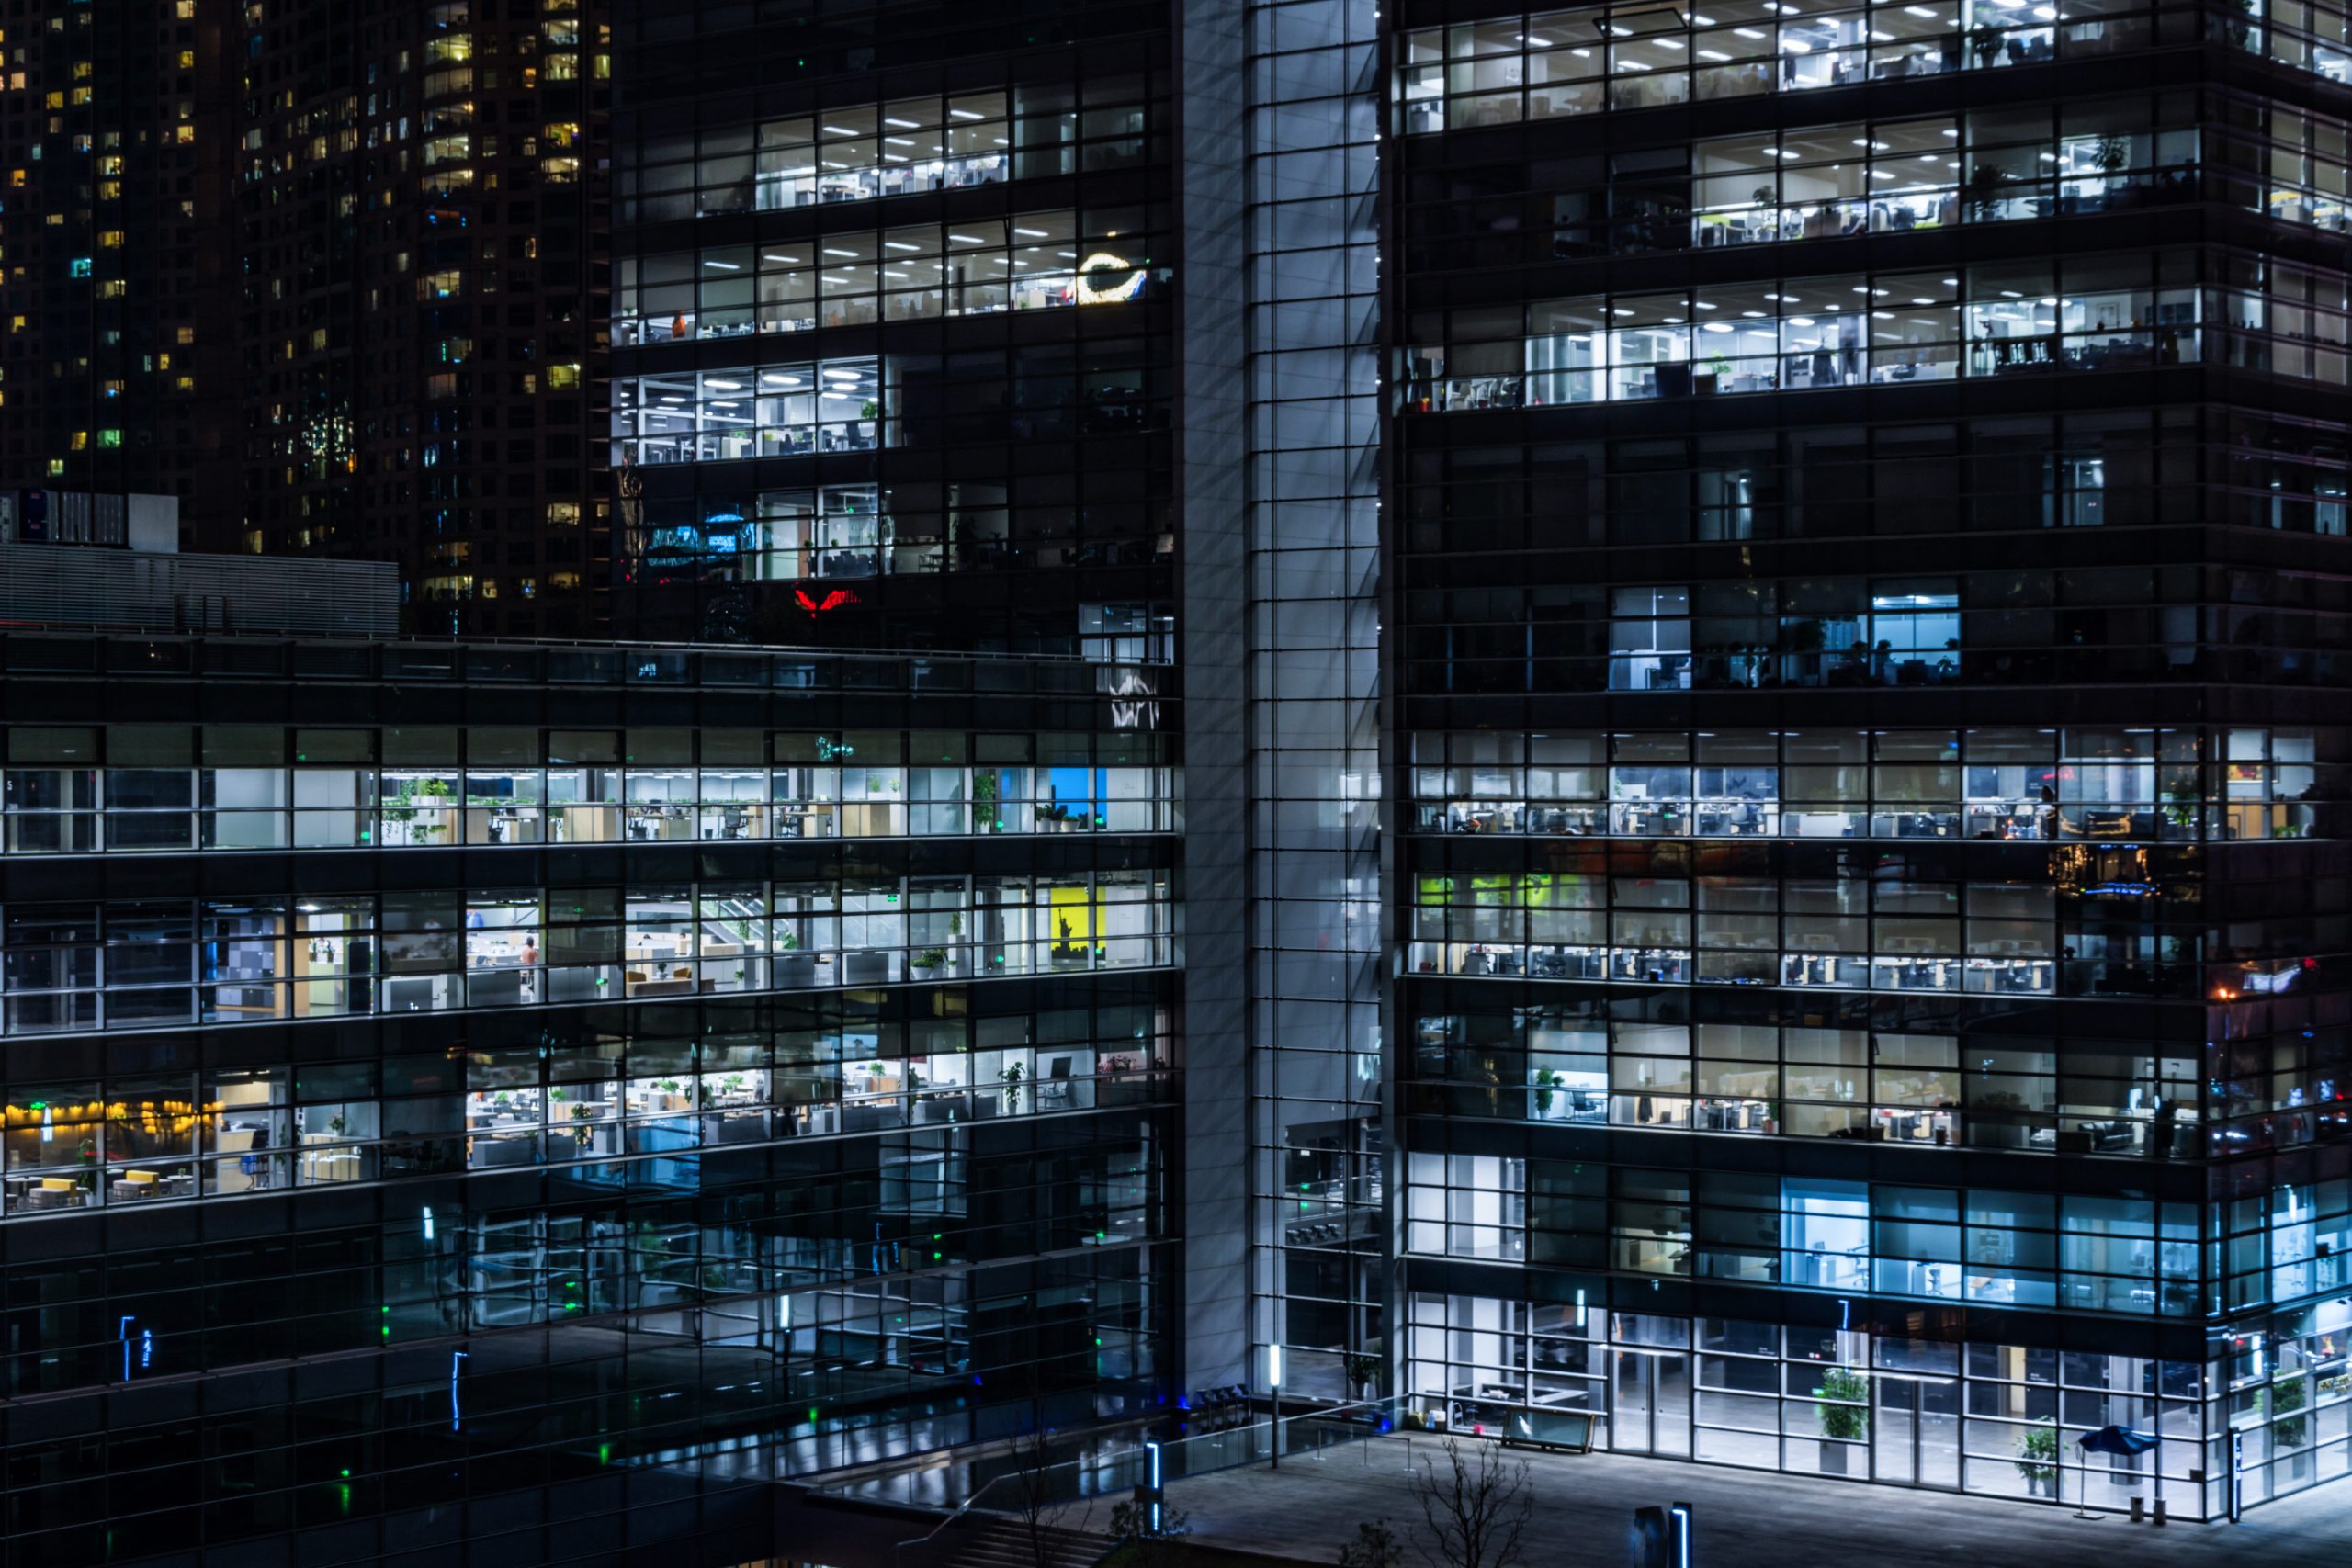 modern office building at night